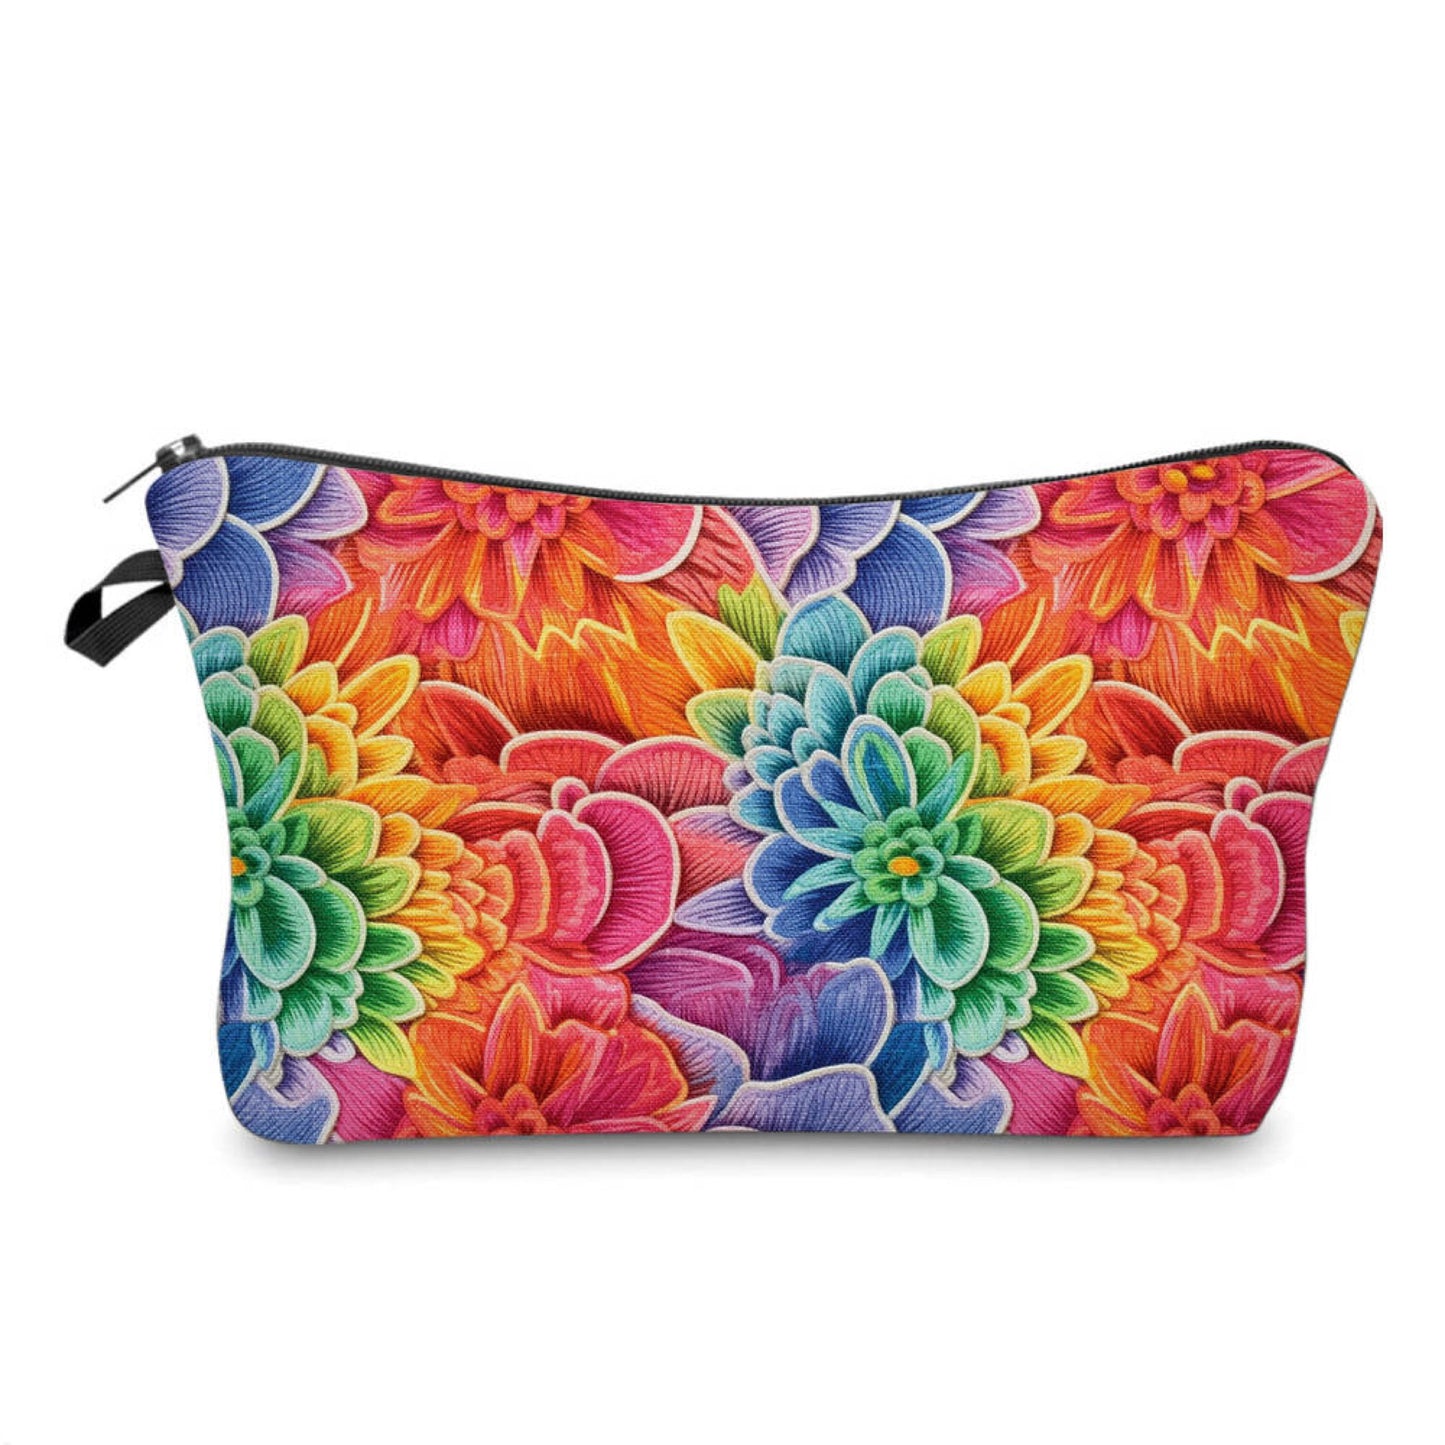 Pouch - Floral, Bright Colorful Embroidery